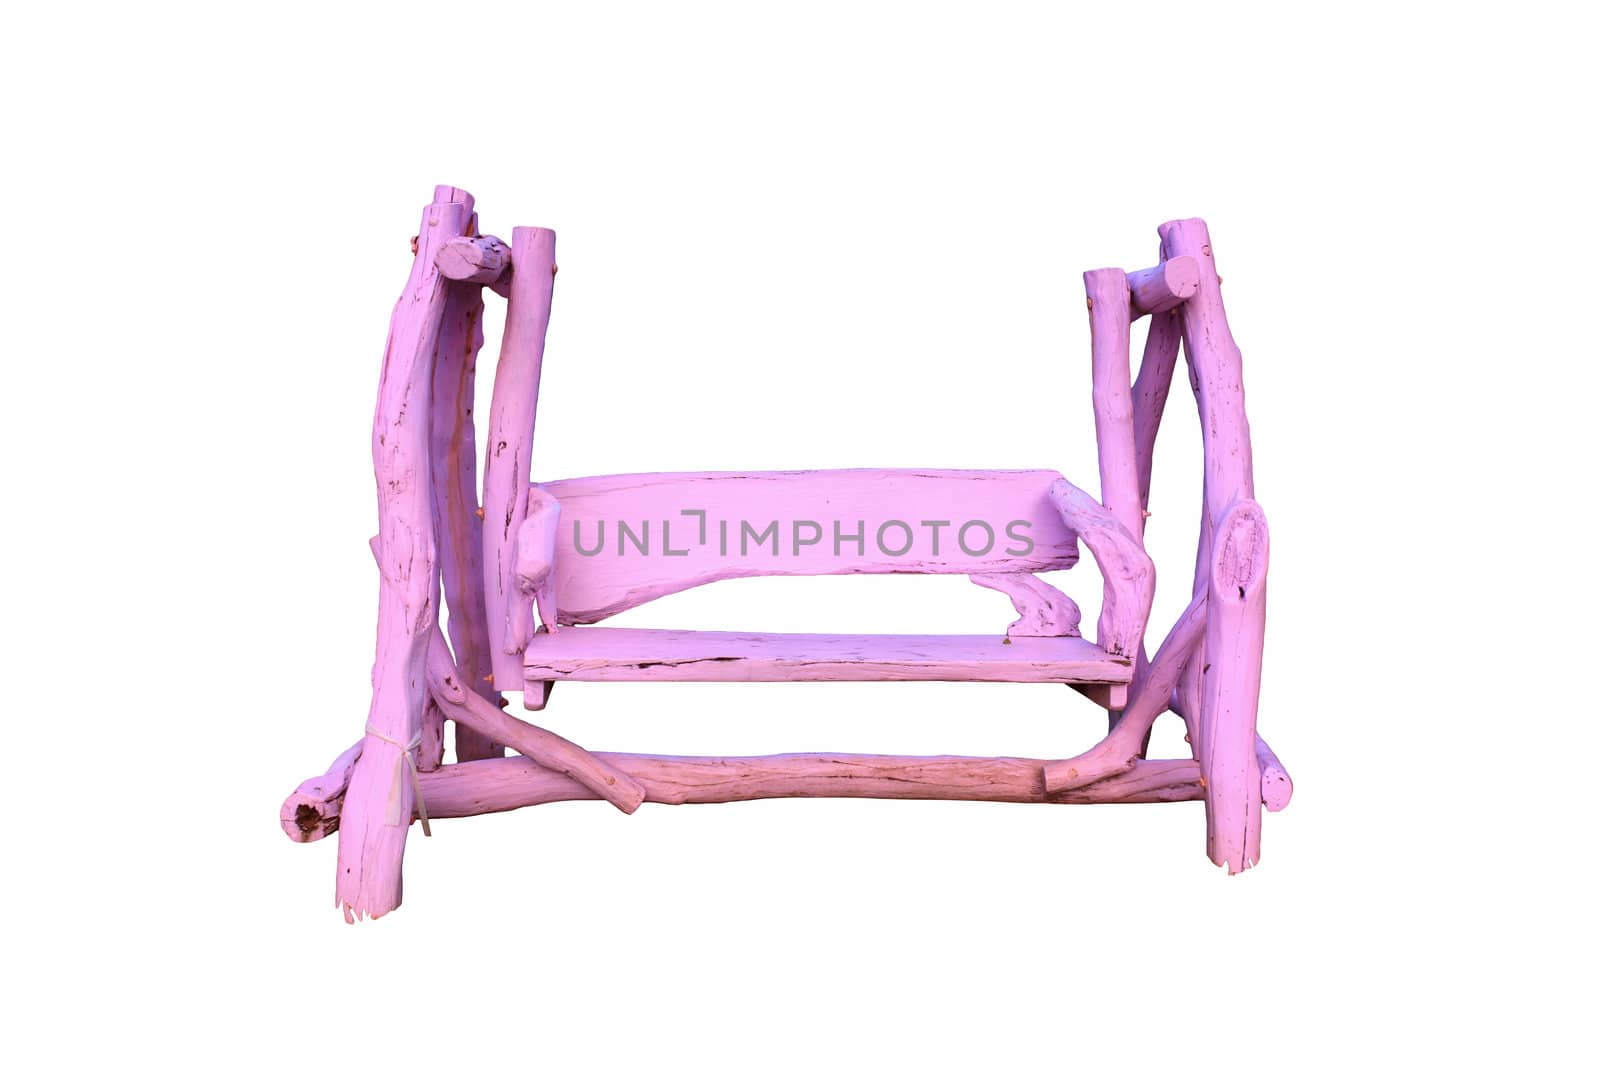 Pink wooden rocking chair on white background. (clipping path)